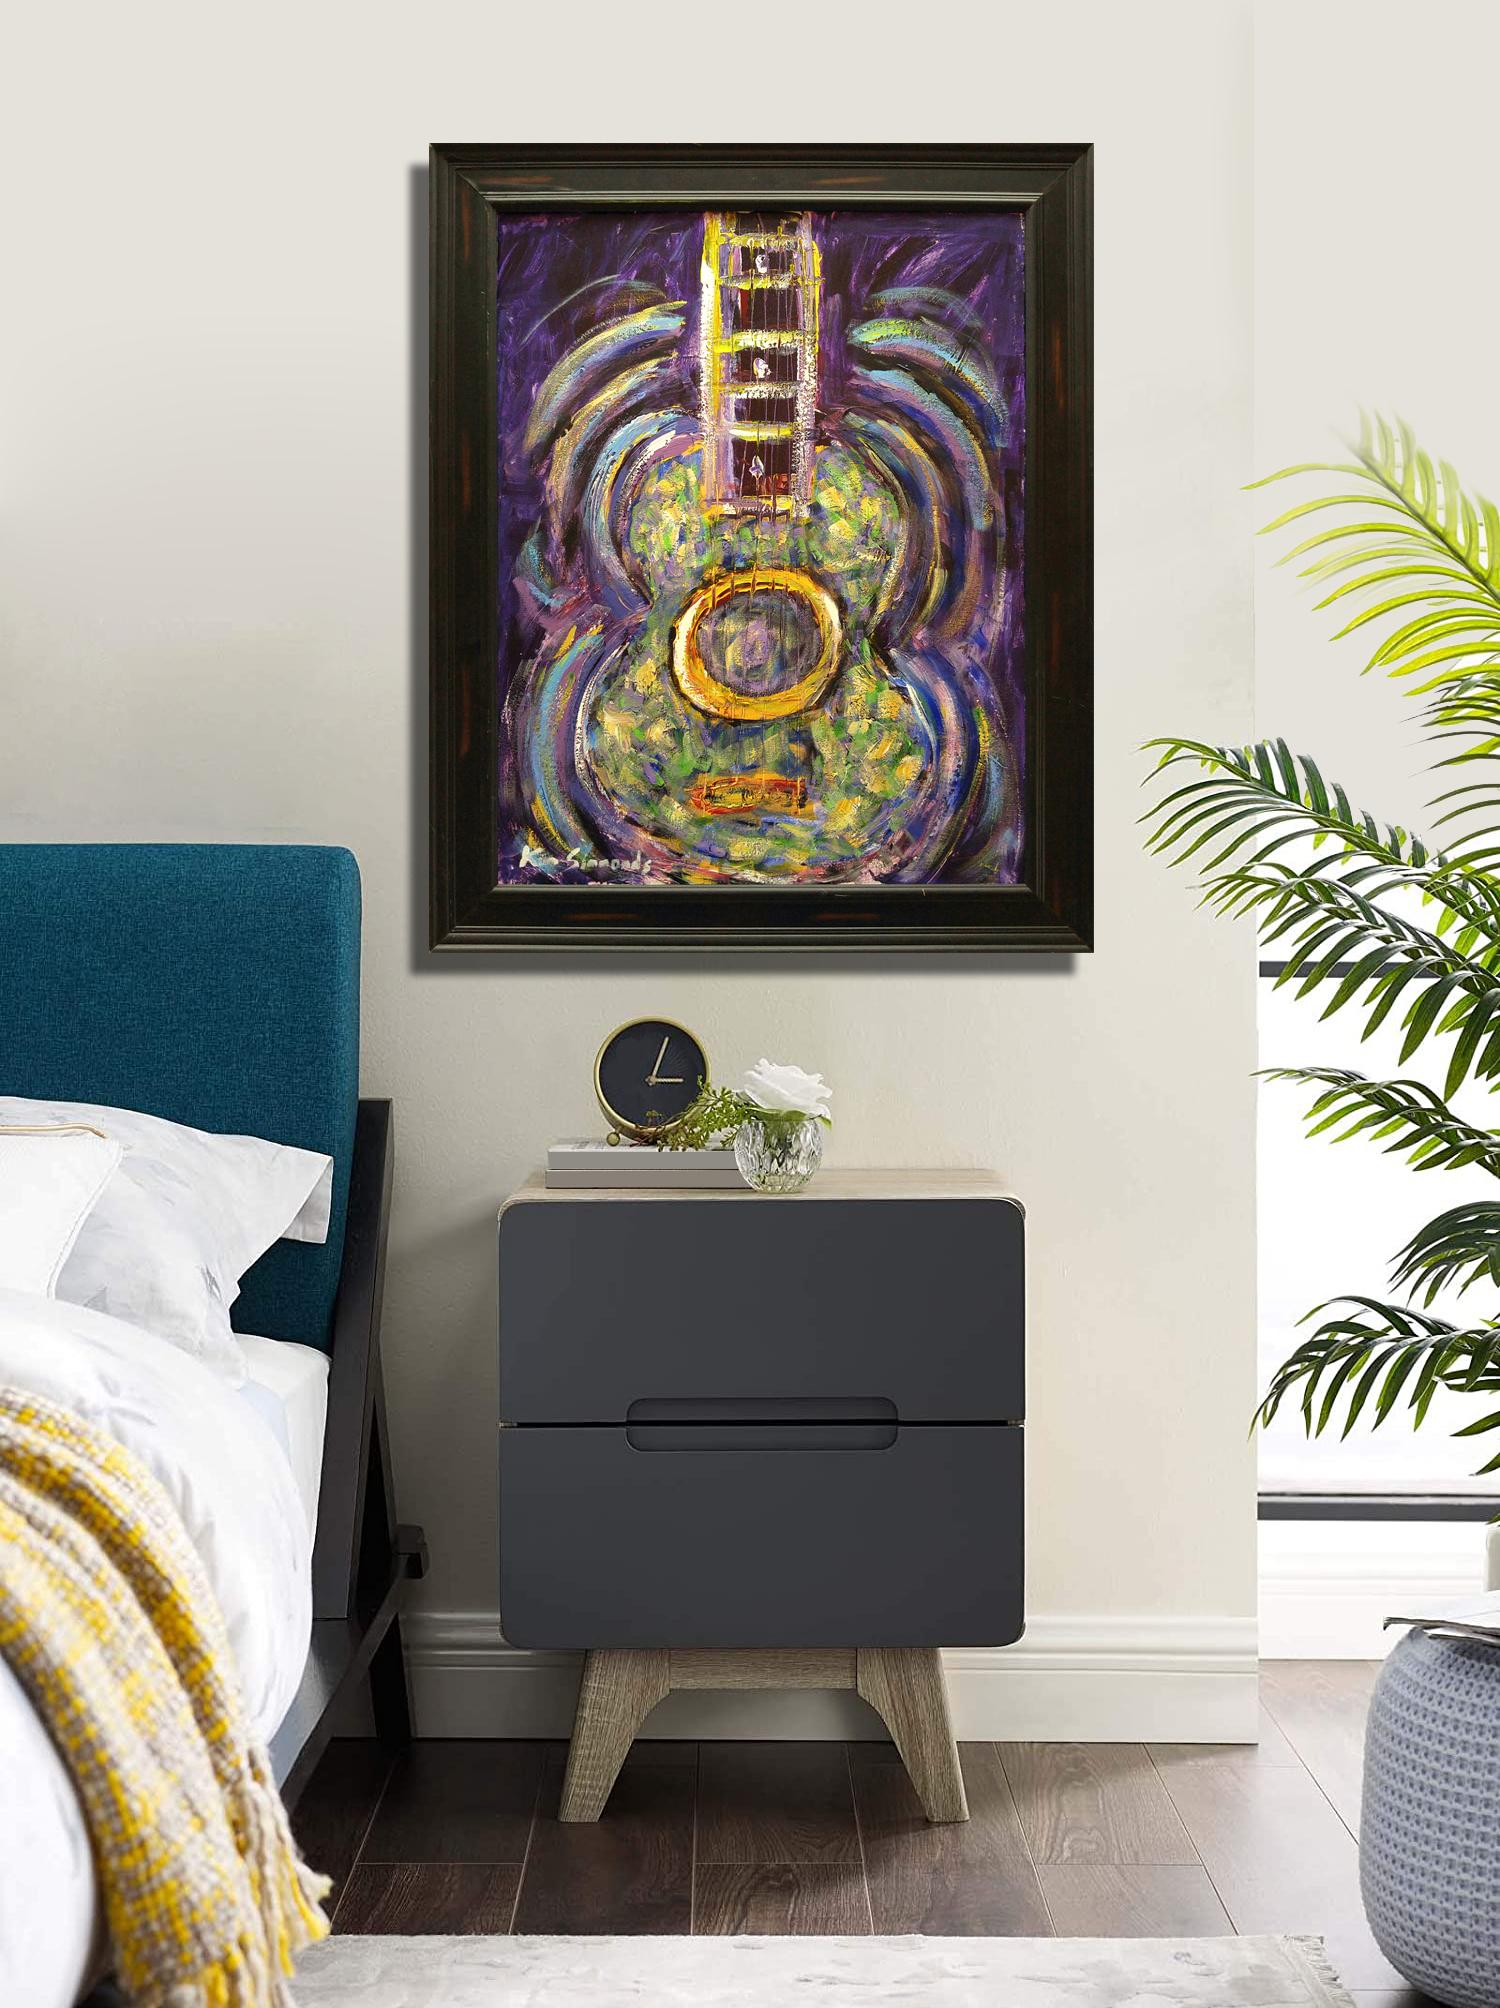 Space Guitar in violet and green, 33x27 framed, acrylic on canvas - Black Still-Life Painting by Kim Simmonds